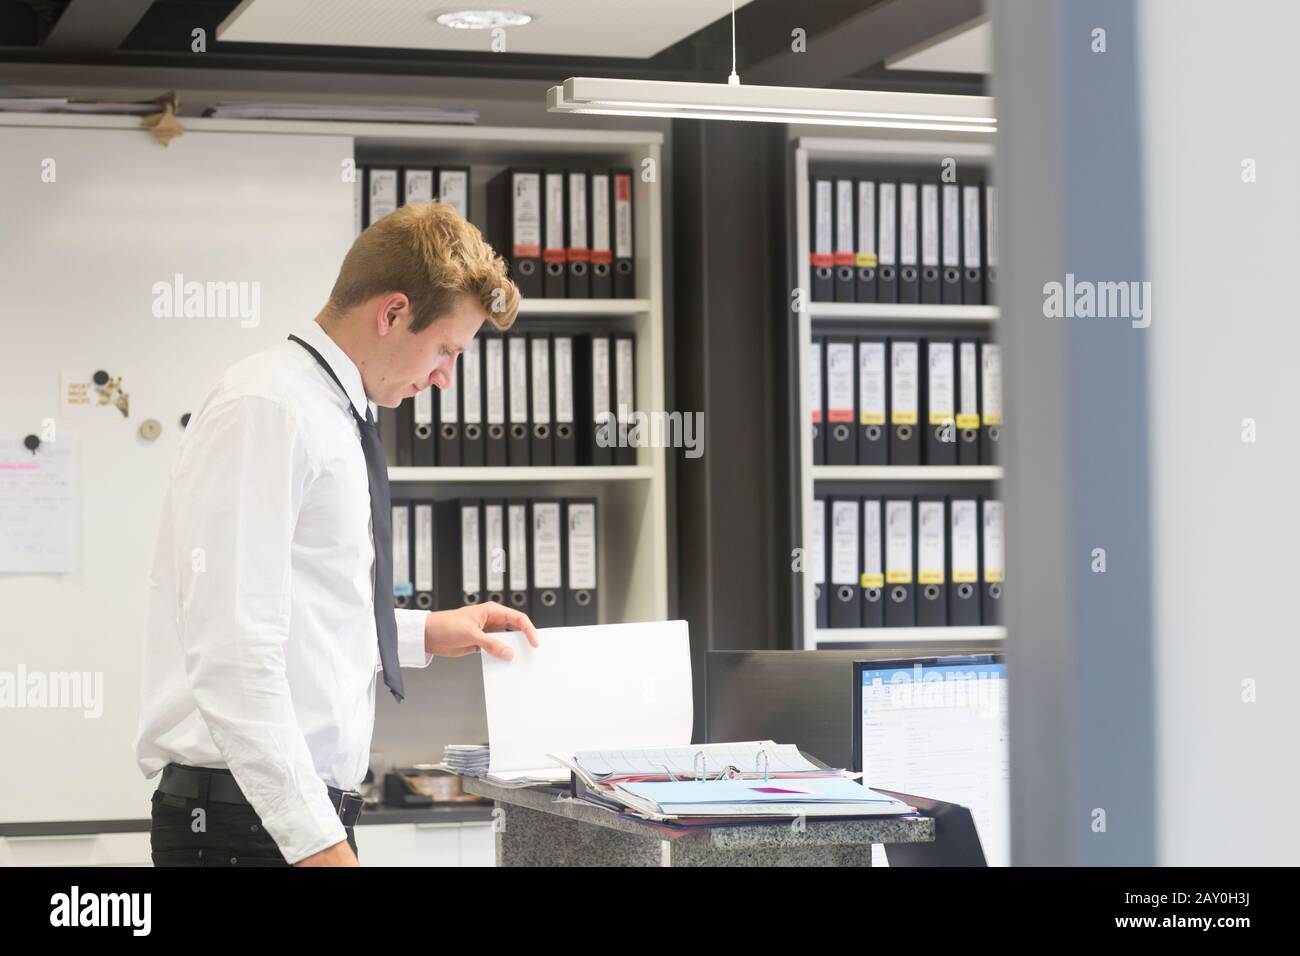 Salesman standing in a shop's office looking at a brochure, Germany Stock Photo